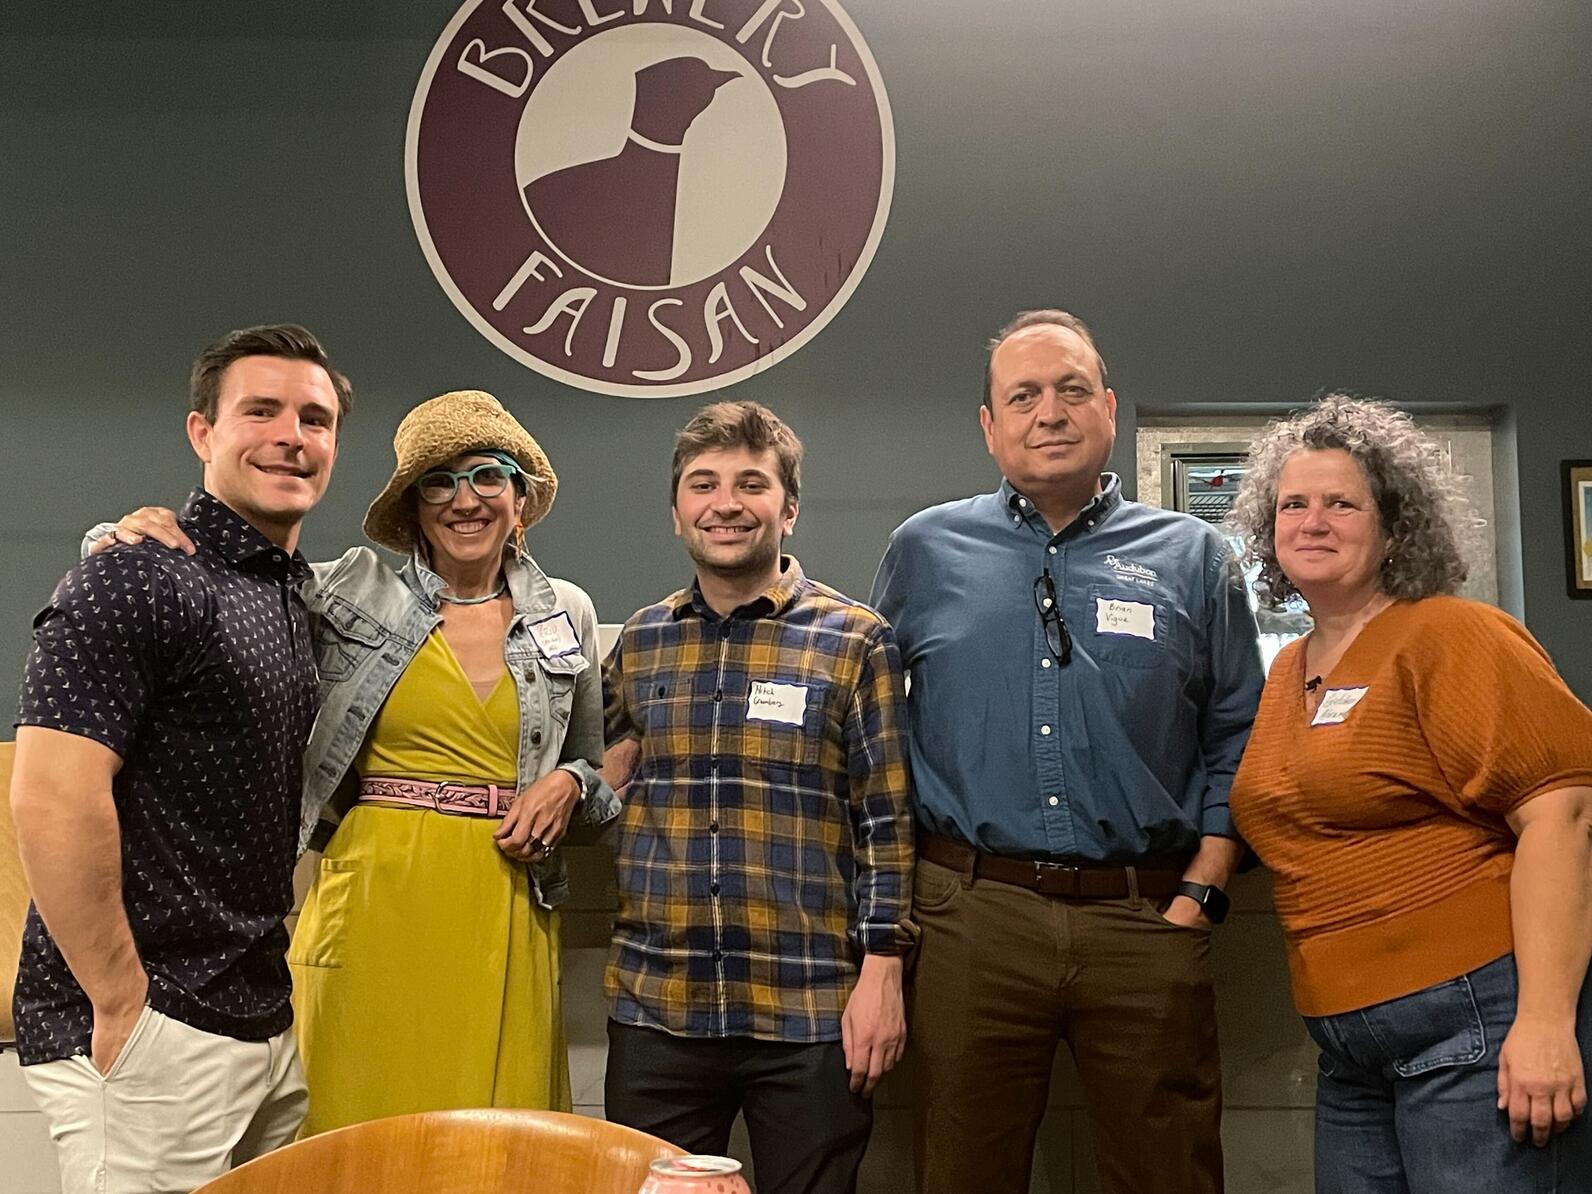 (Left to right) Adam Forrer, Policy Director of Climate for Audubon Great Lakes; Eriu Martinez, Wild Indigo Coordinator, Detroit for Audubon Great Lakes; Mitch Greenberg, Government Affairs Associate for Audubon Great Lakes; Brian Vigue, Policy Director o